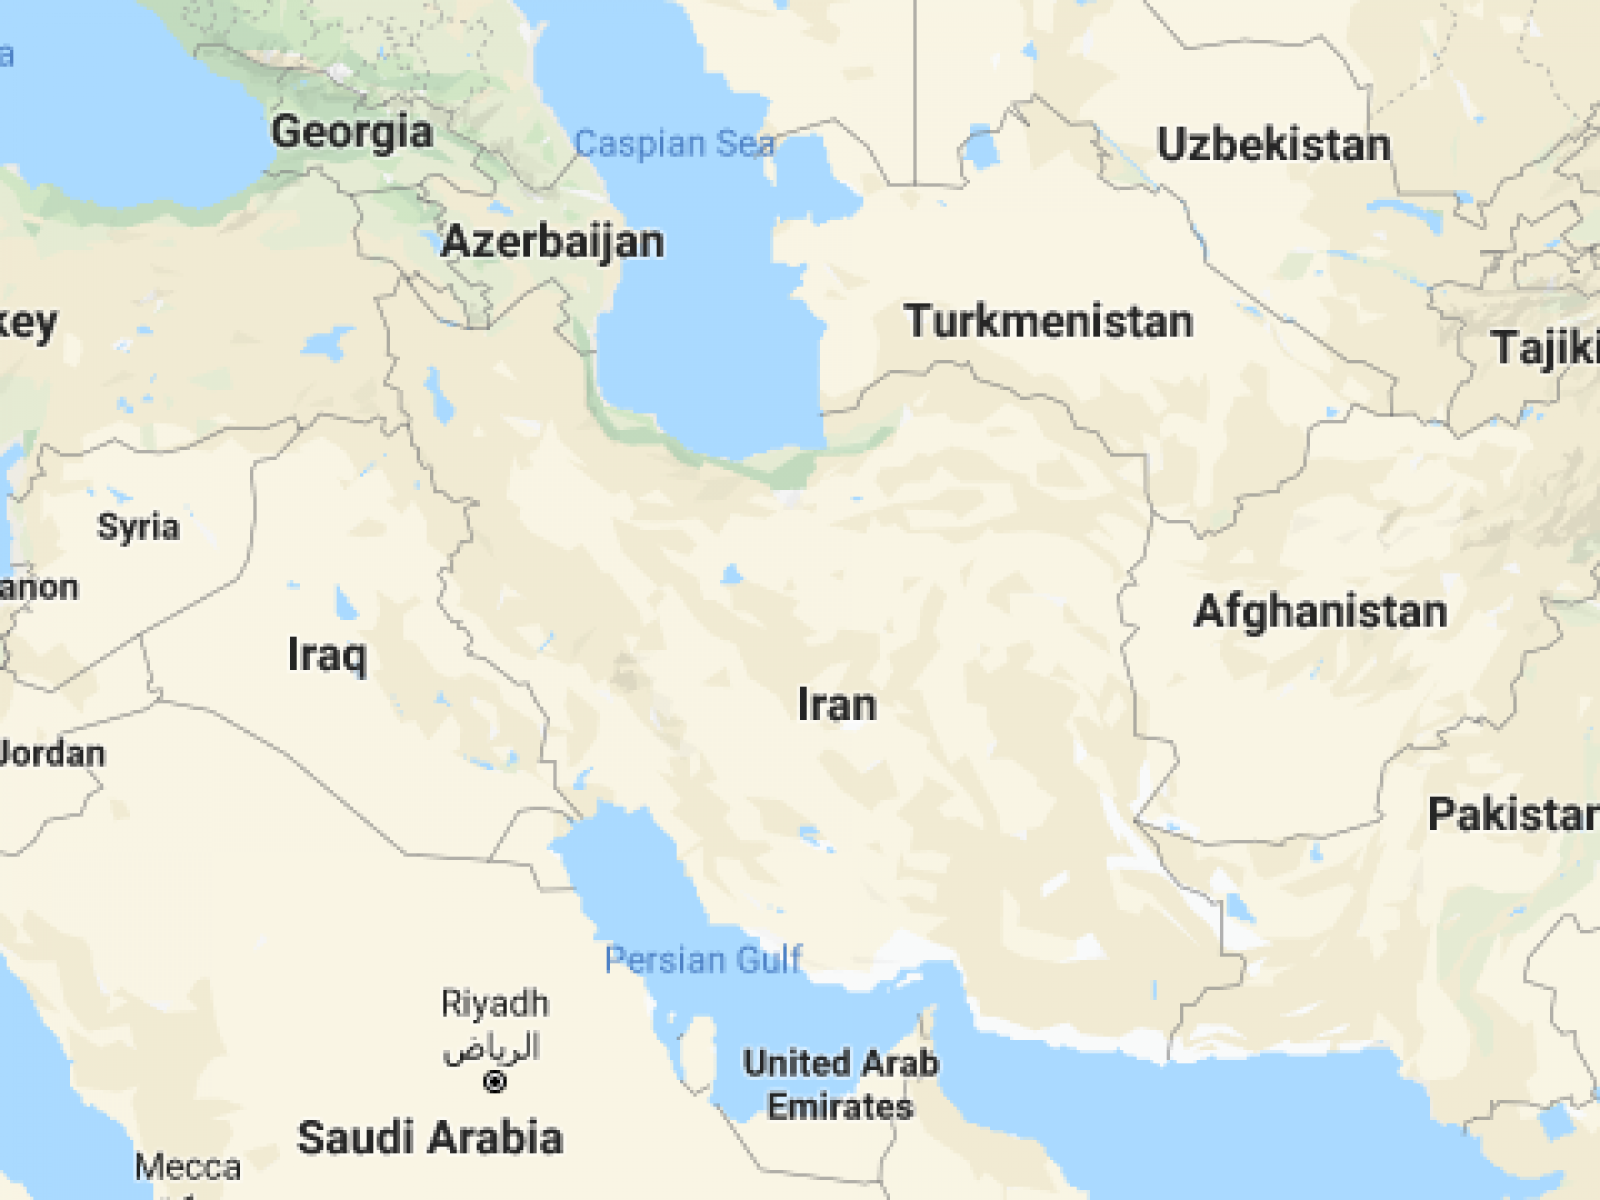 Iran and surrounding countries